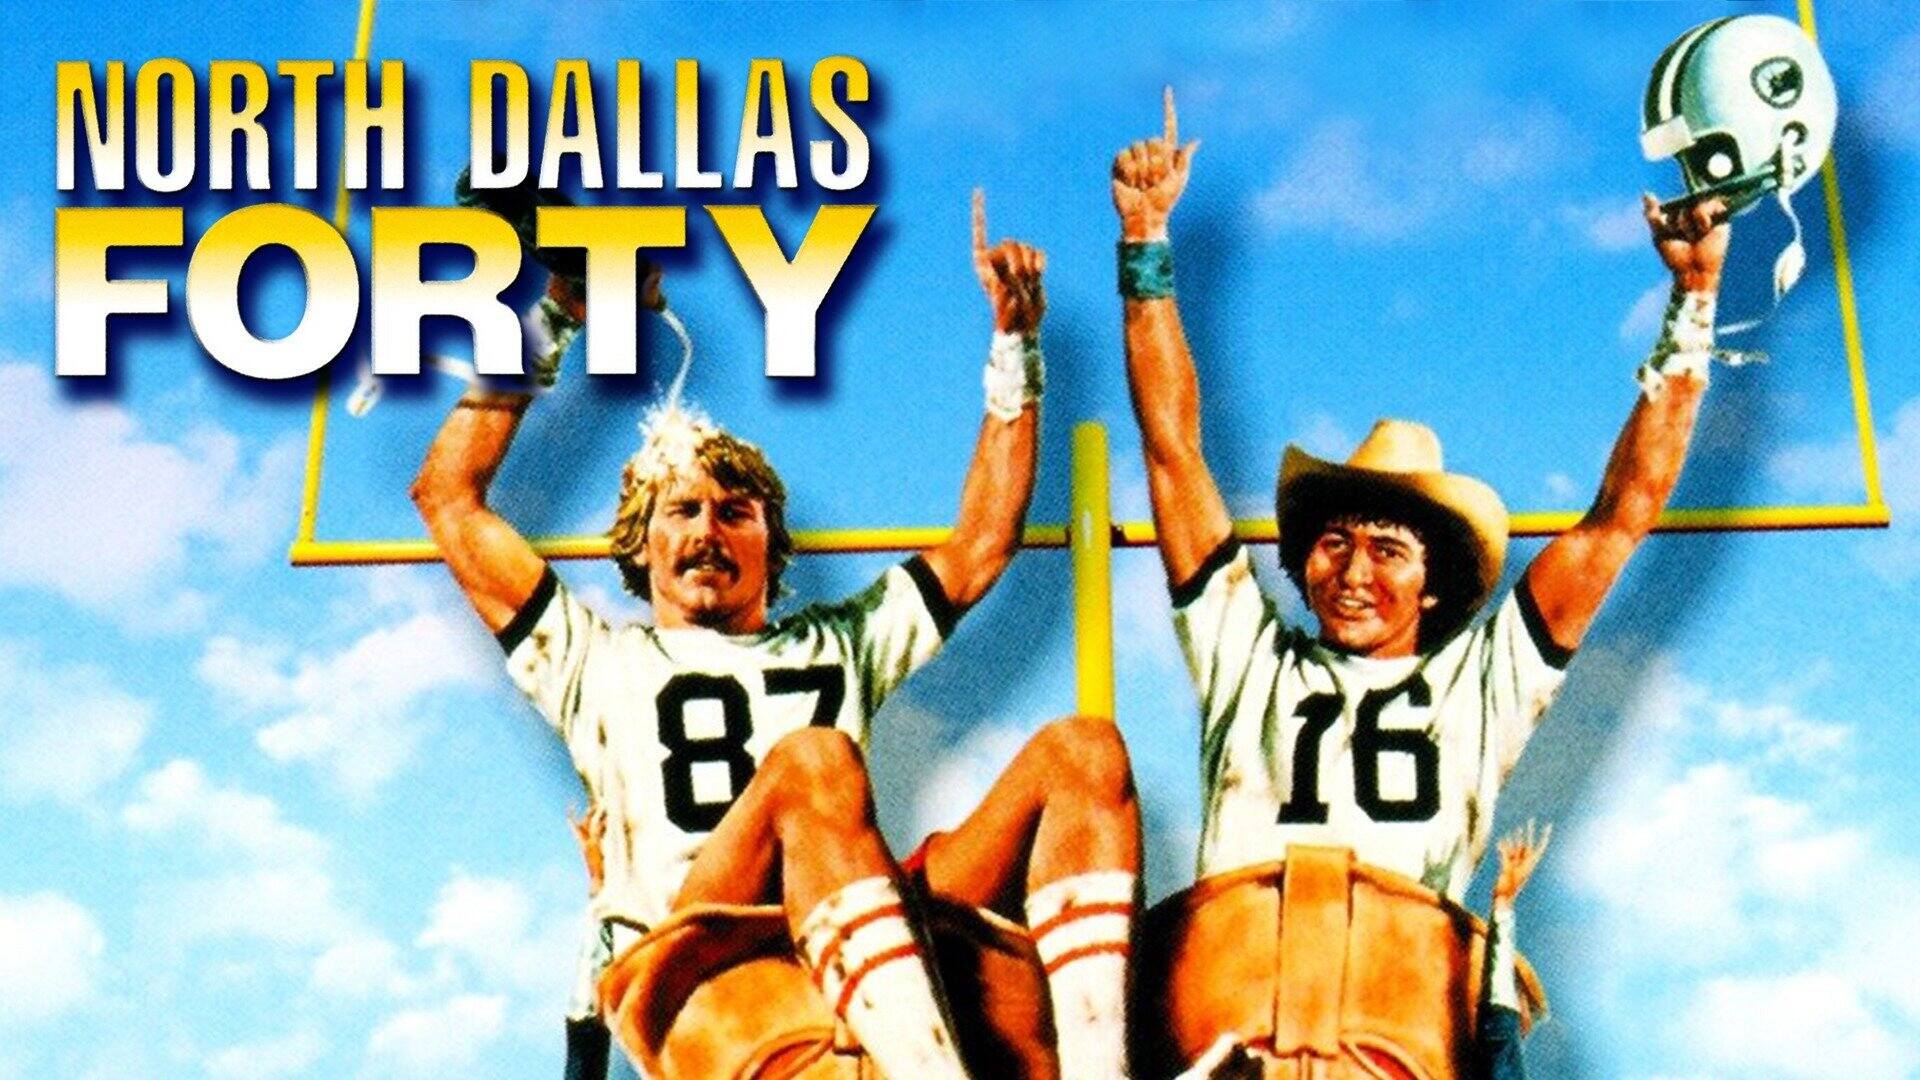 31-facts-about-the-movie-north-dallas-forty